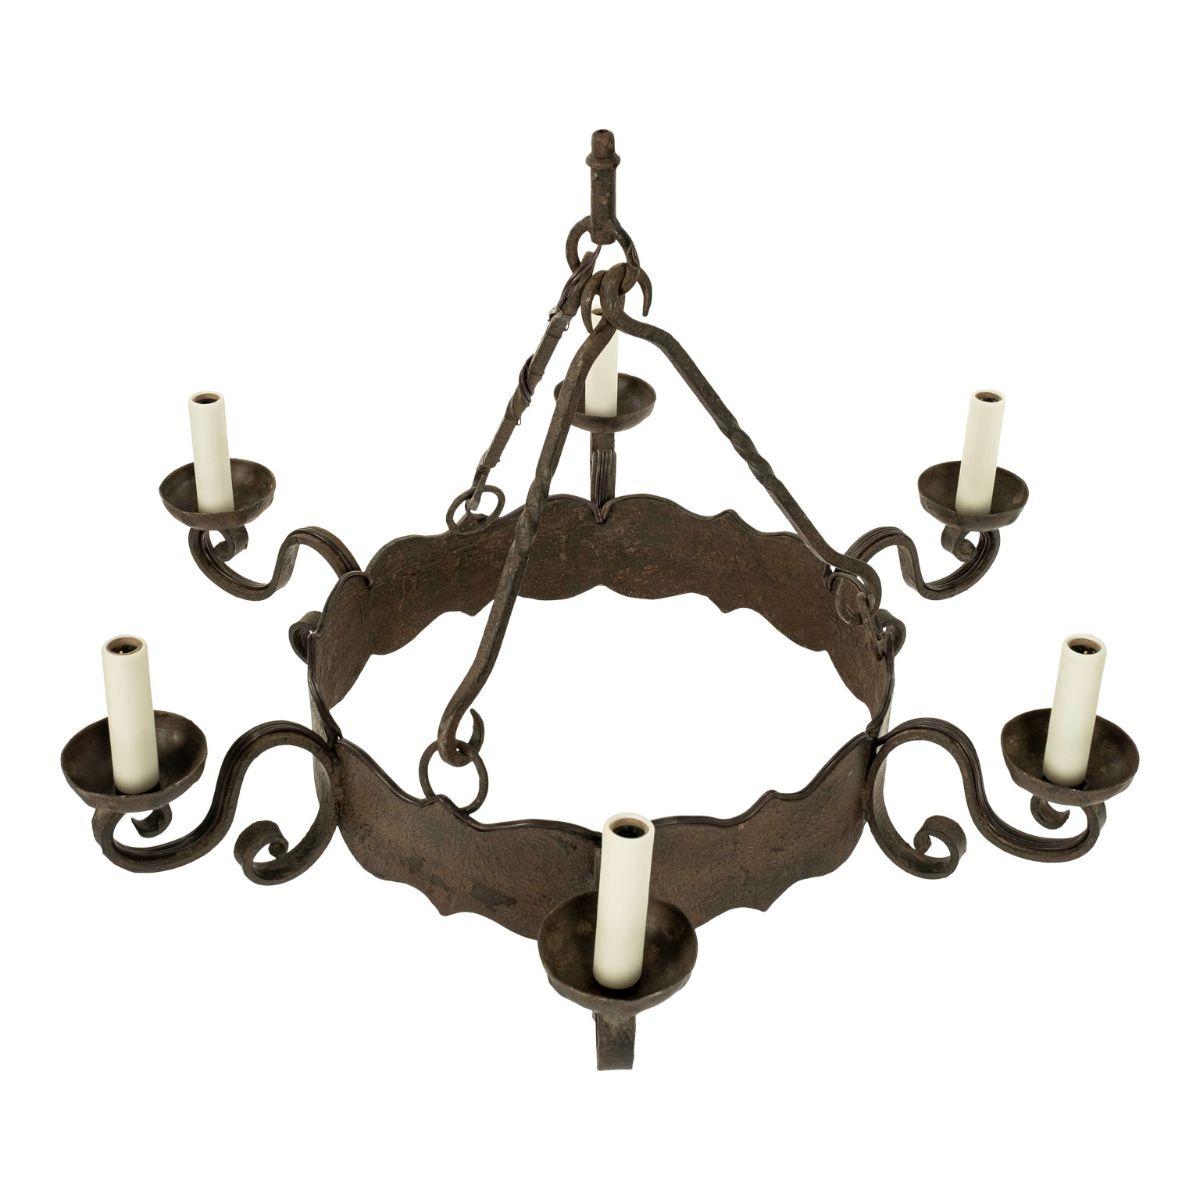 French Provincial Round Heavy Iron Chandelier